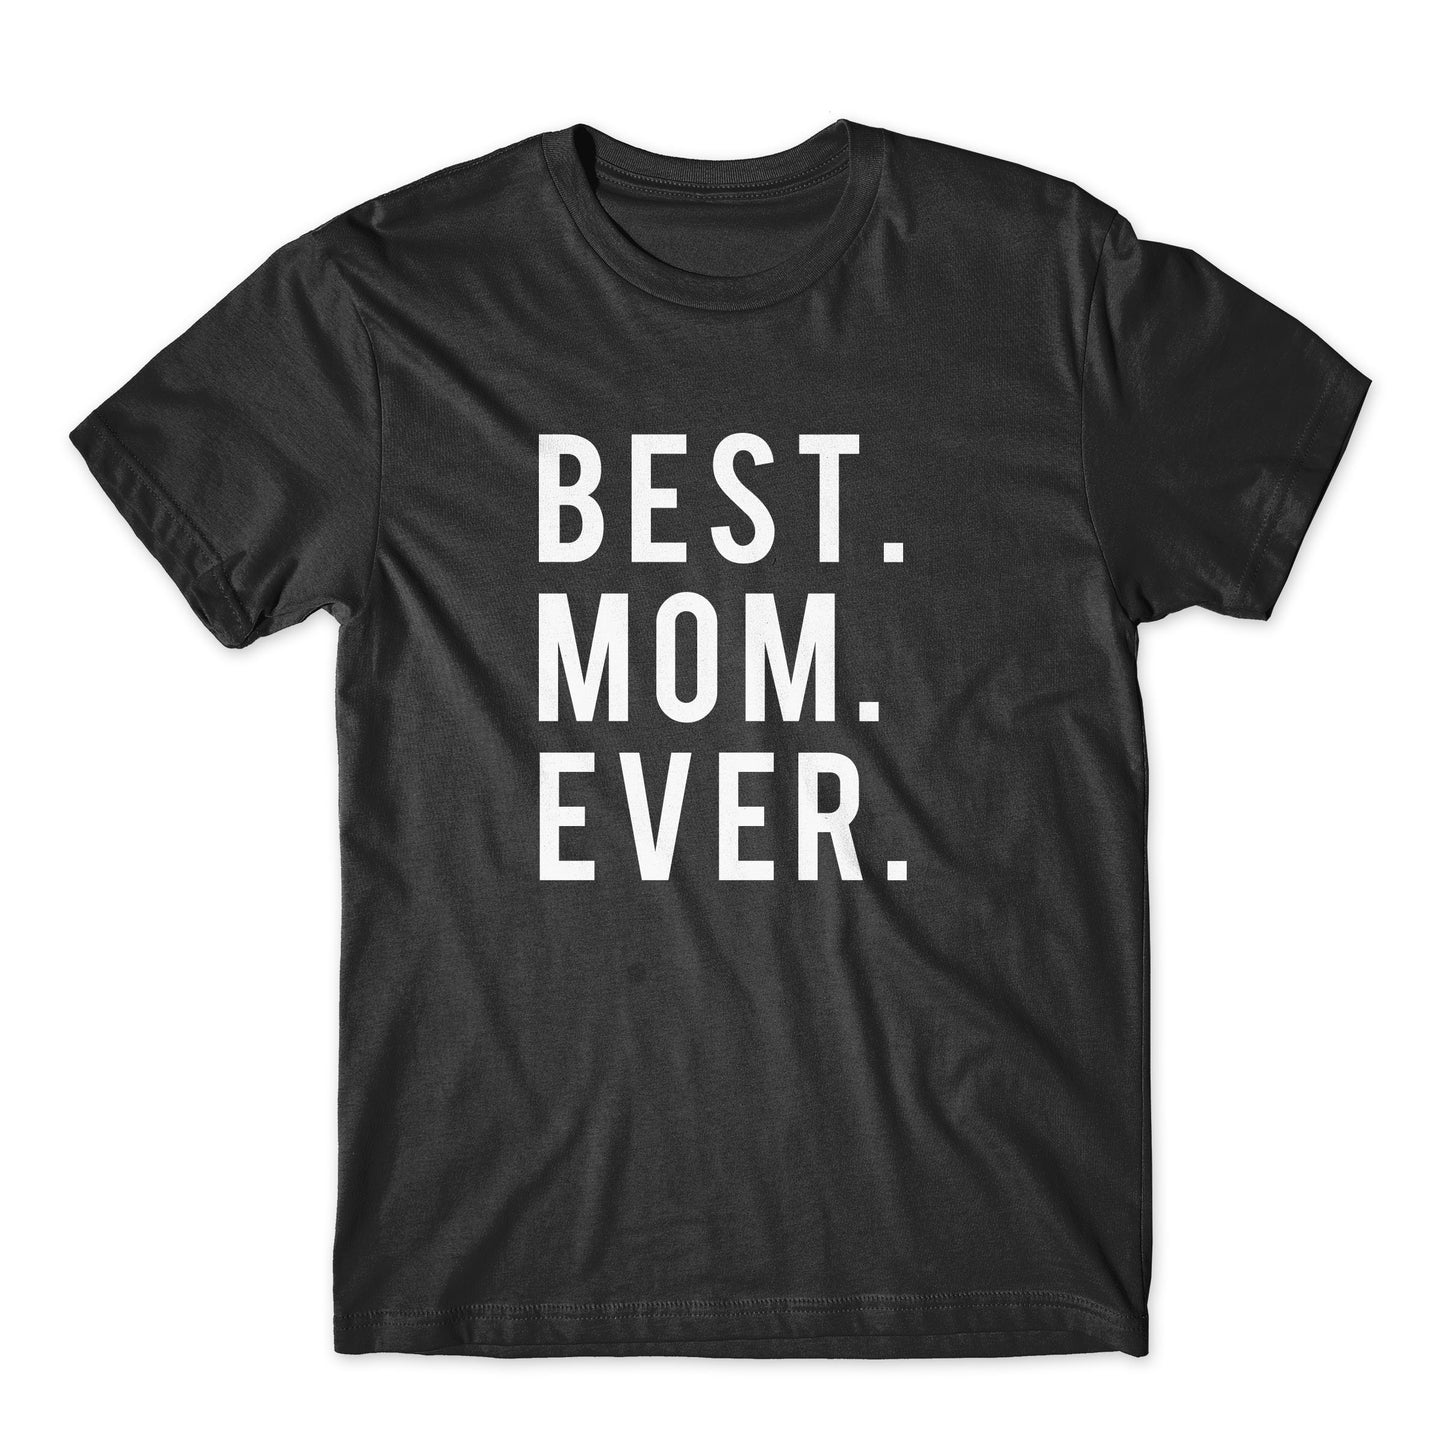 Best. Mom. Ever. On Black, White, or Gray Soft Cotton  Premium Shirt. Mother's Day Gift for Mom. Comfy!